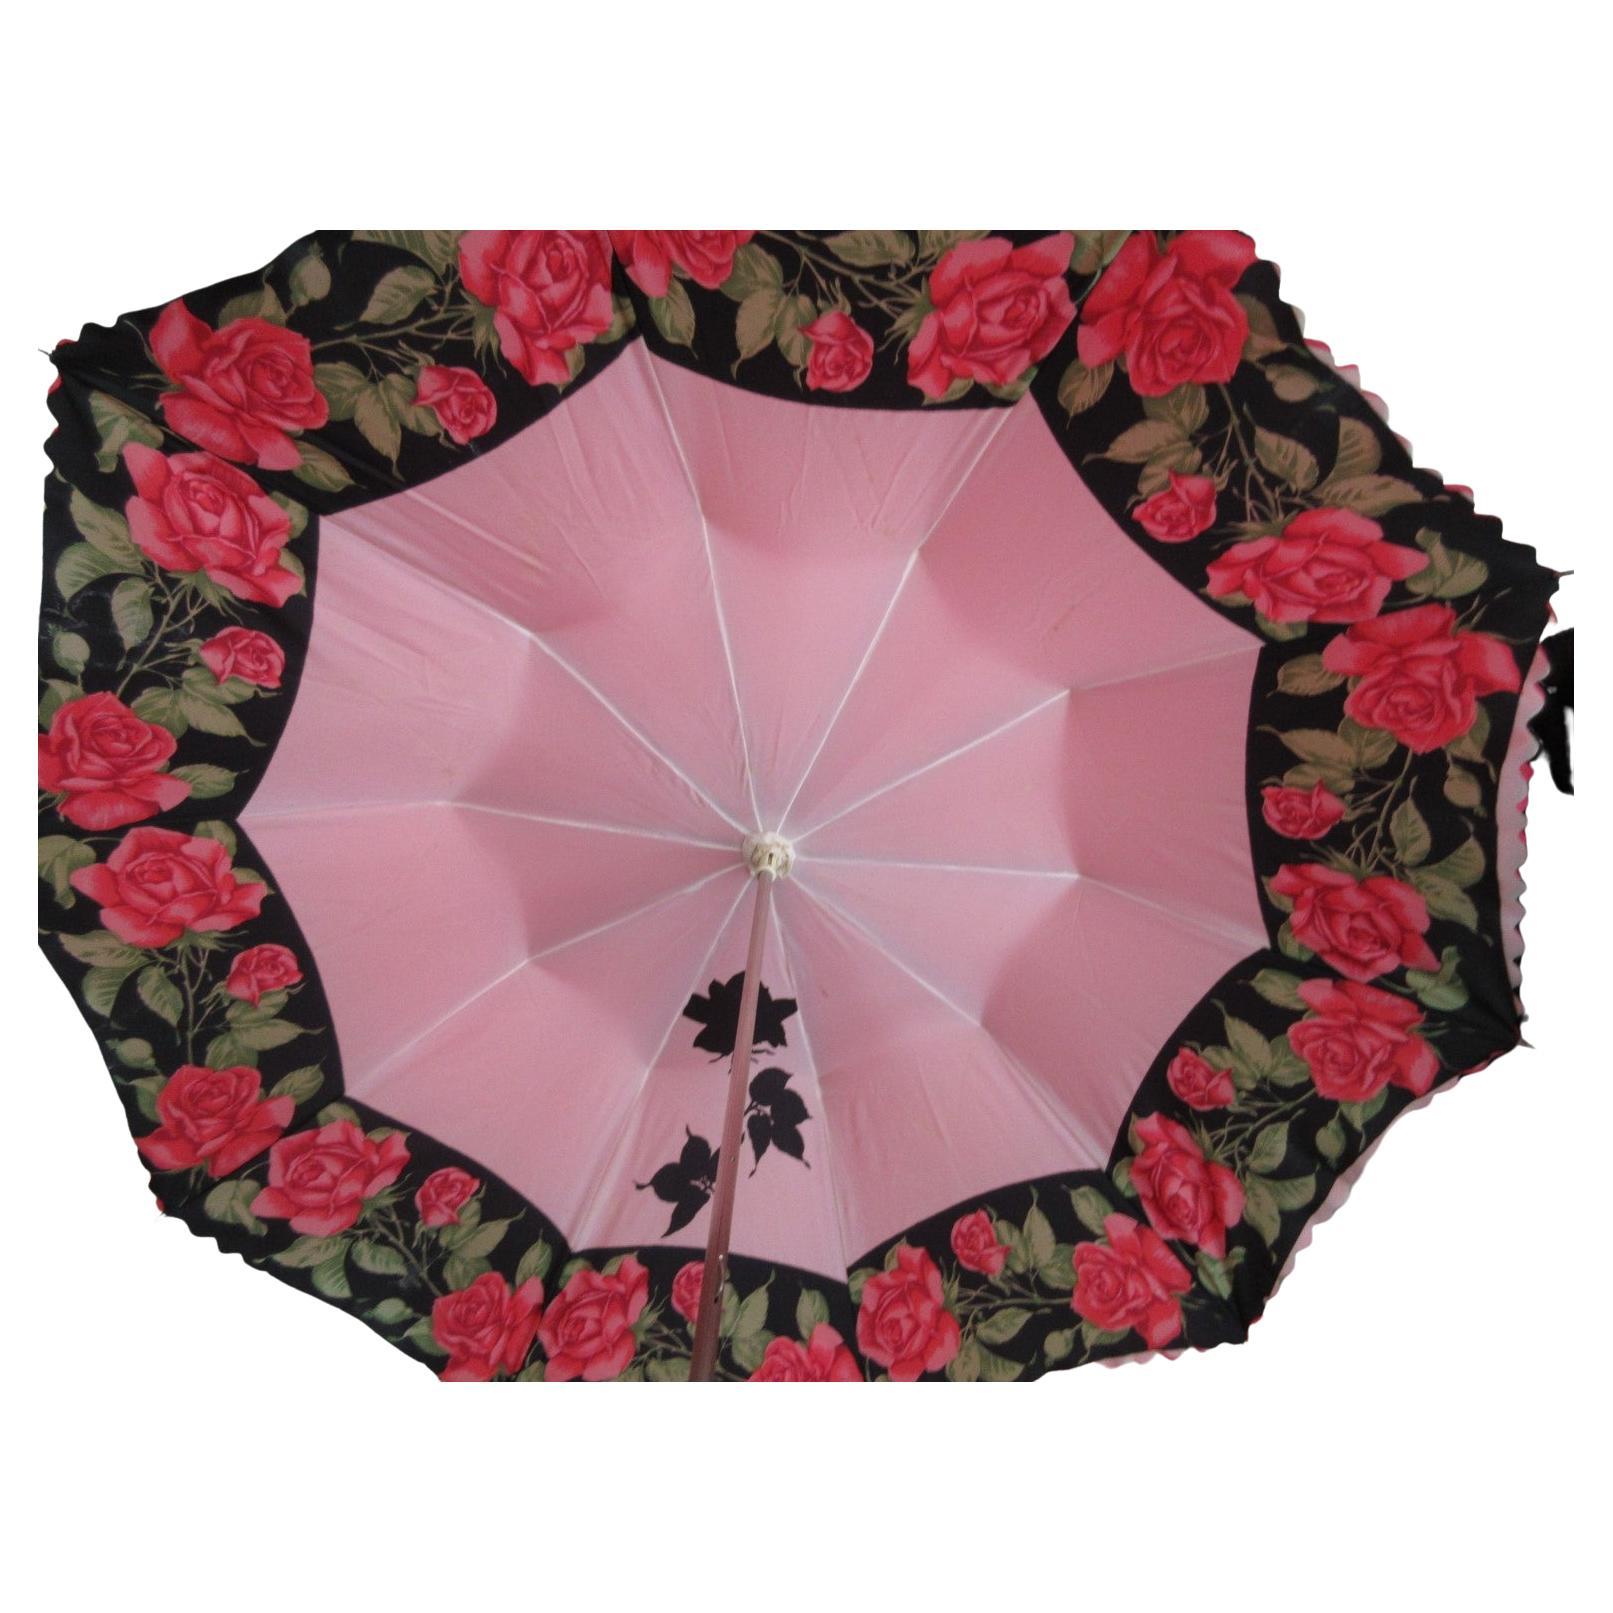 1960's Barbie Pink Umbrella Parasol Roses with Horse Details In Fair Condition For Sale In Amsterdam, NL